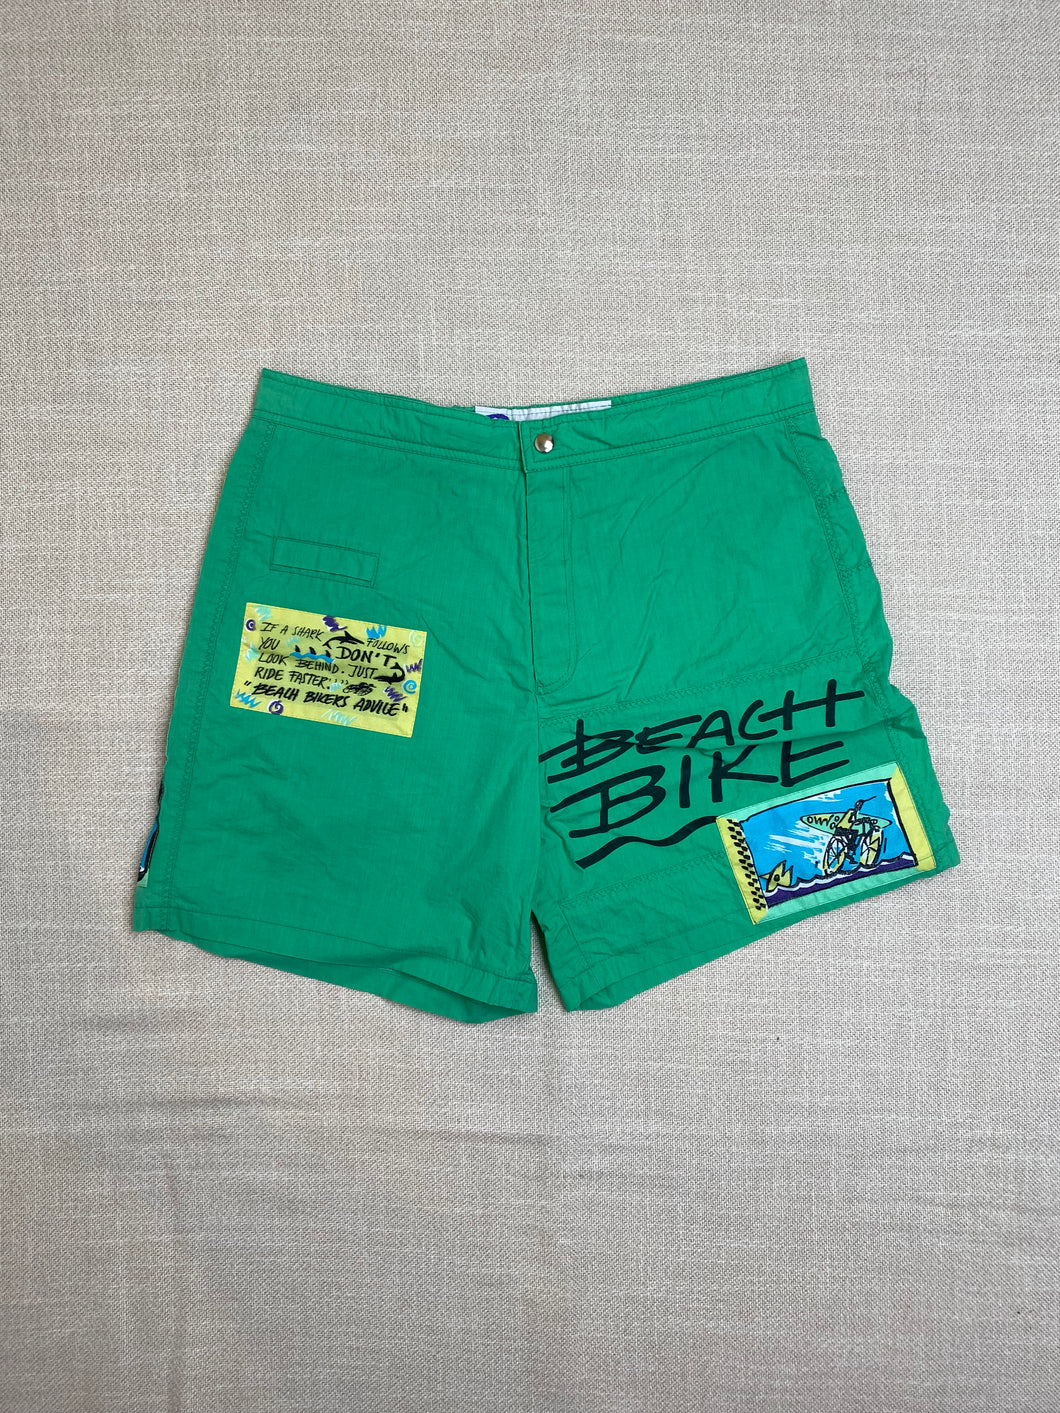 1989 because by HCC shorts green